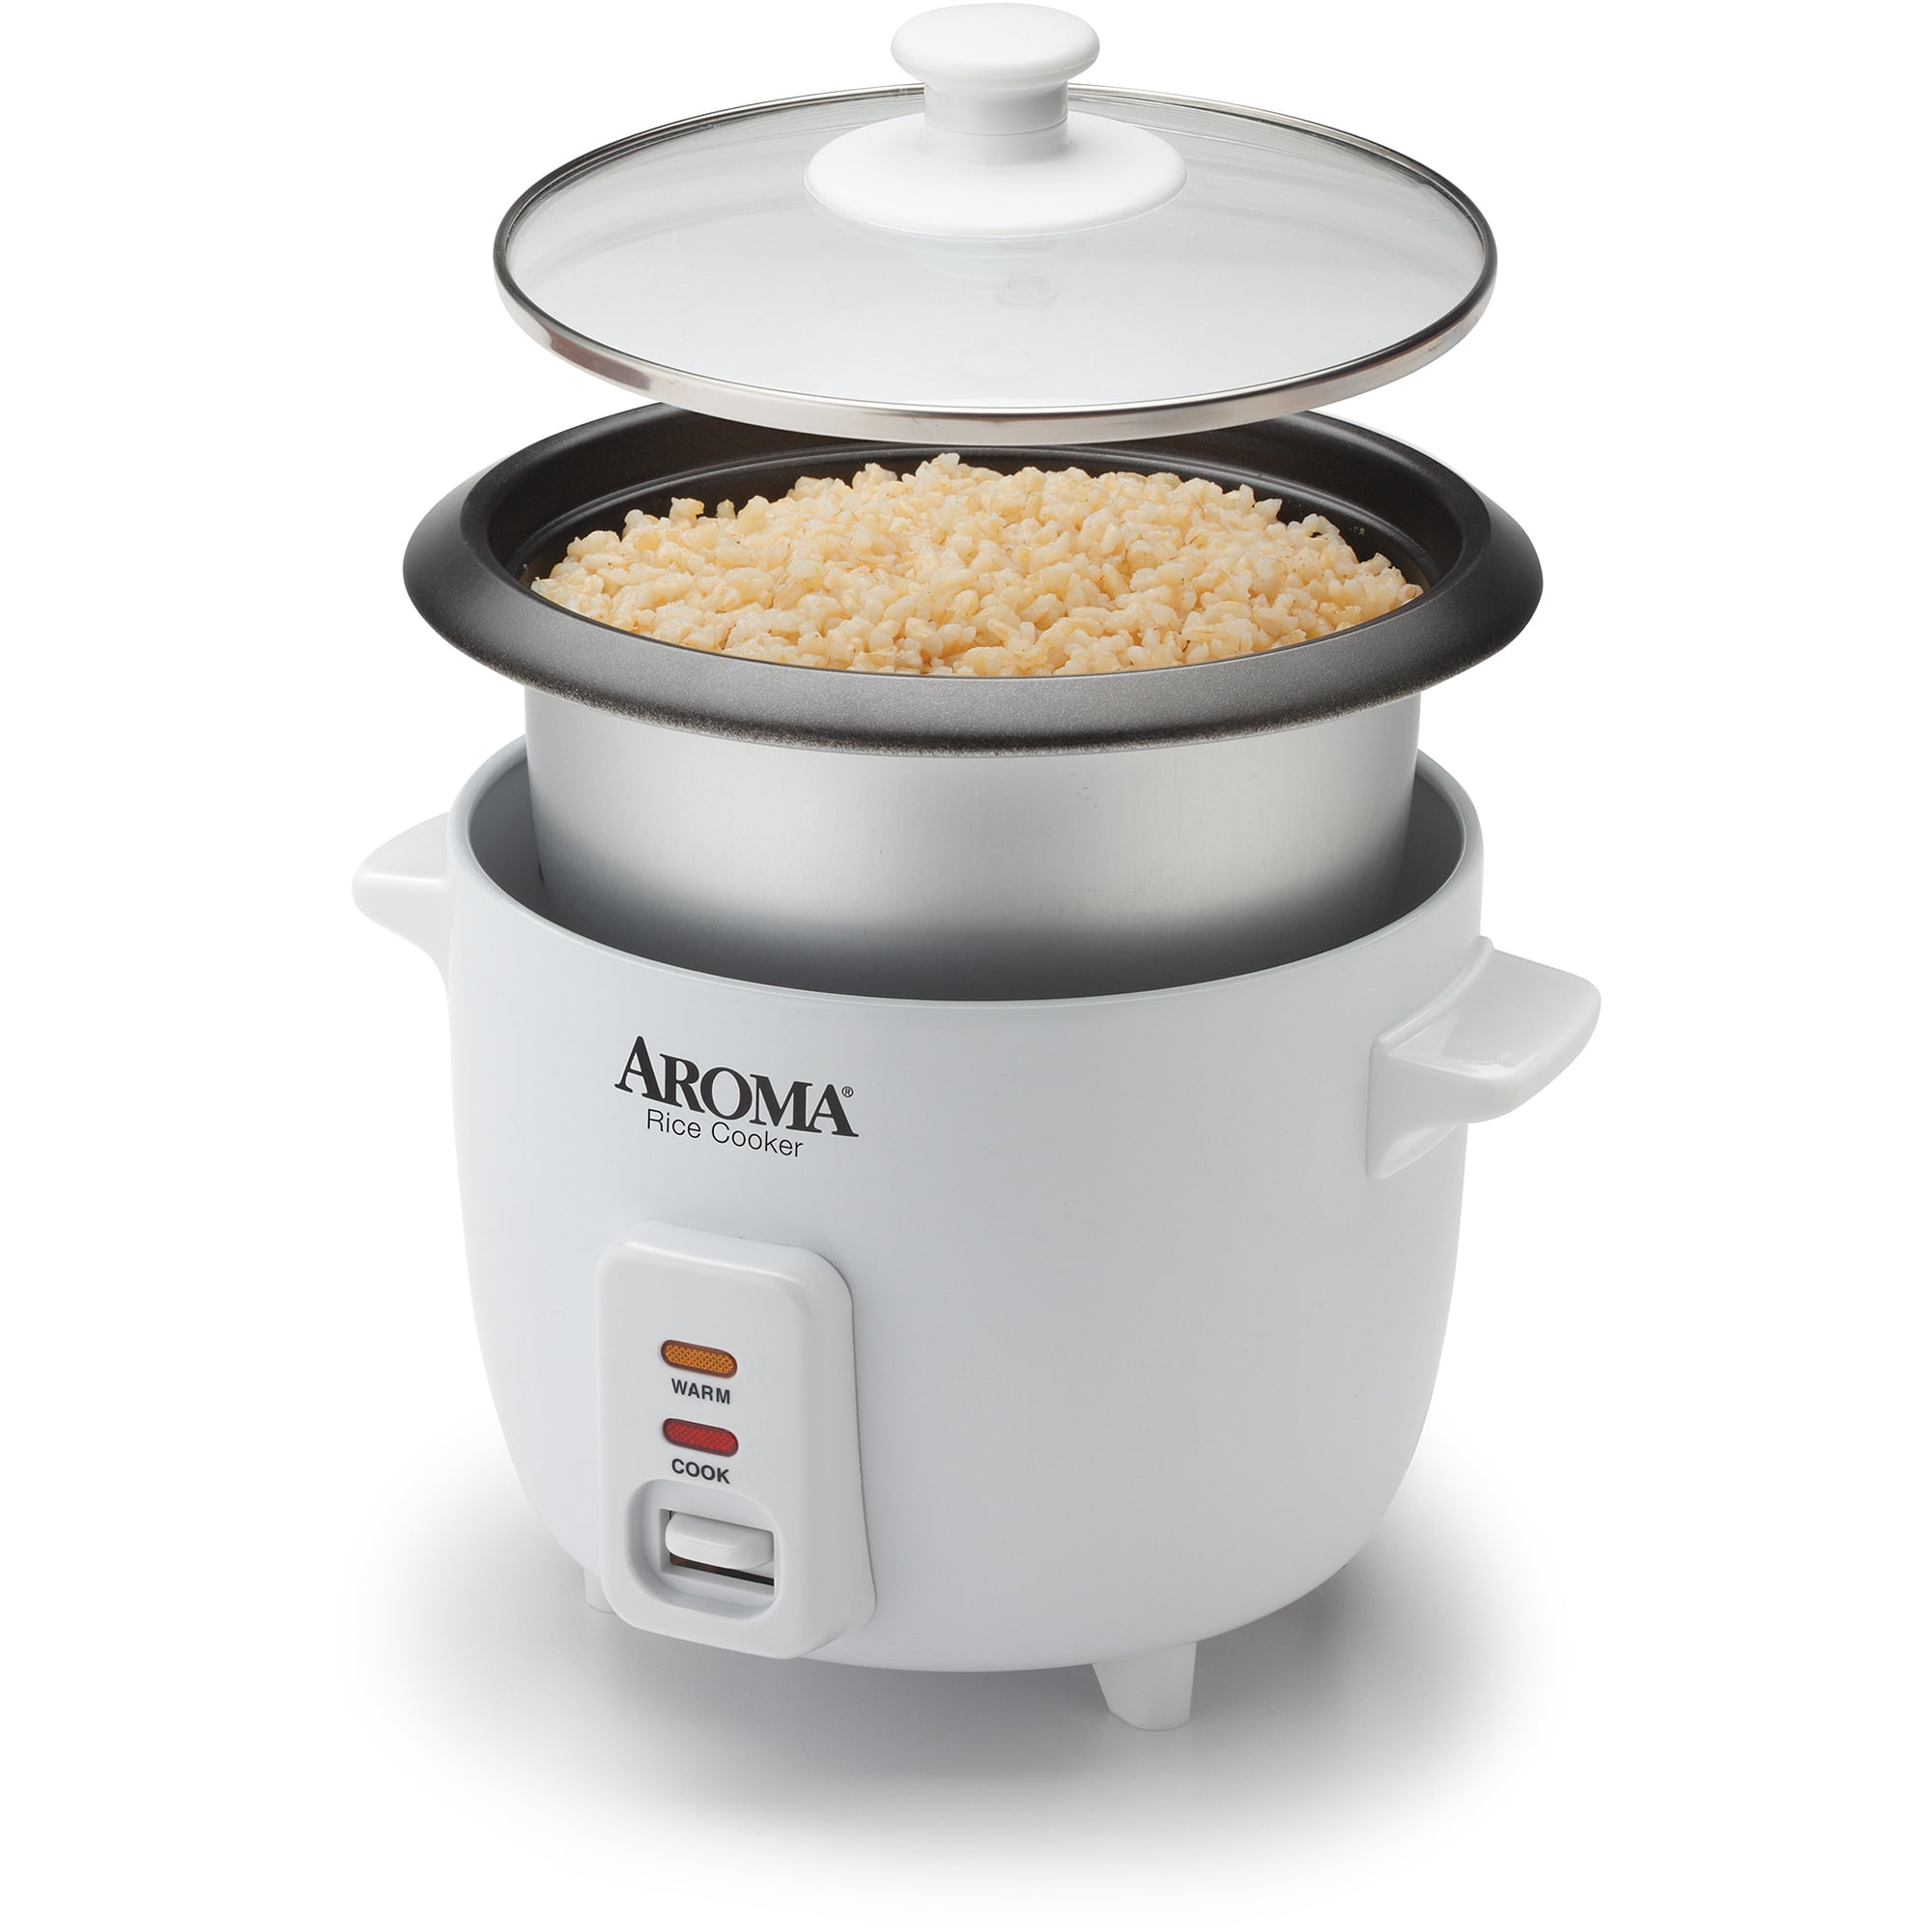 Aroma Rice Cooker Pot Replacement: Finding The Perfect Fit